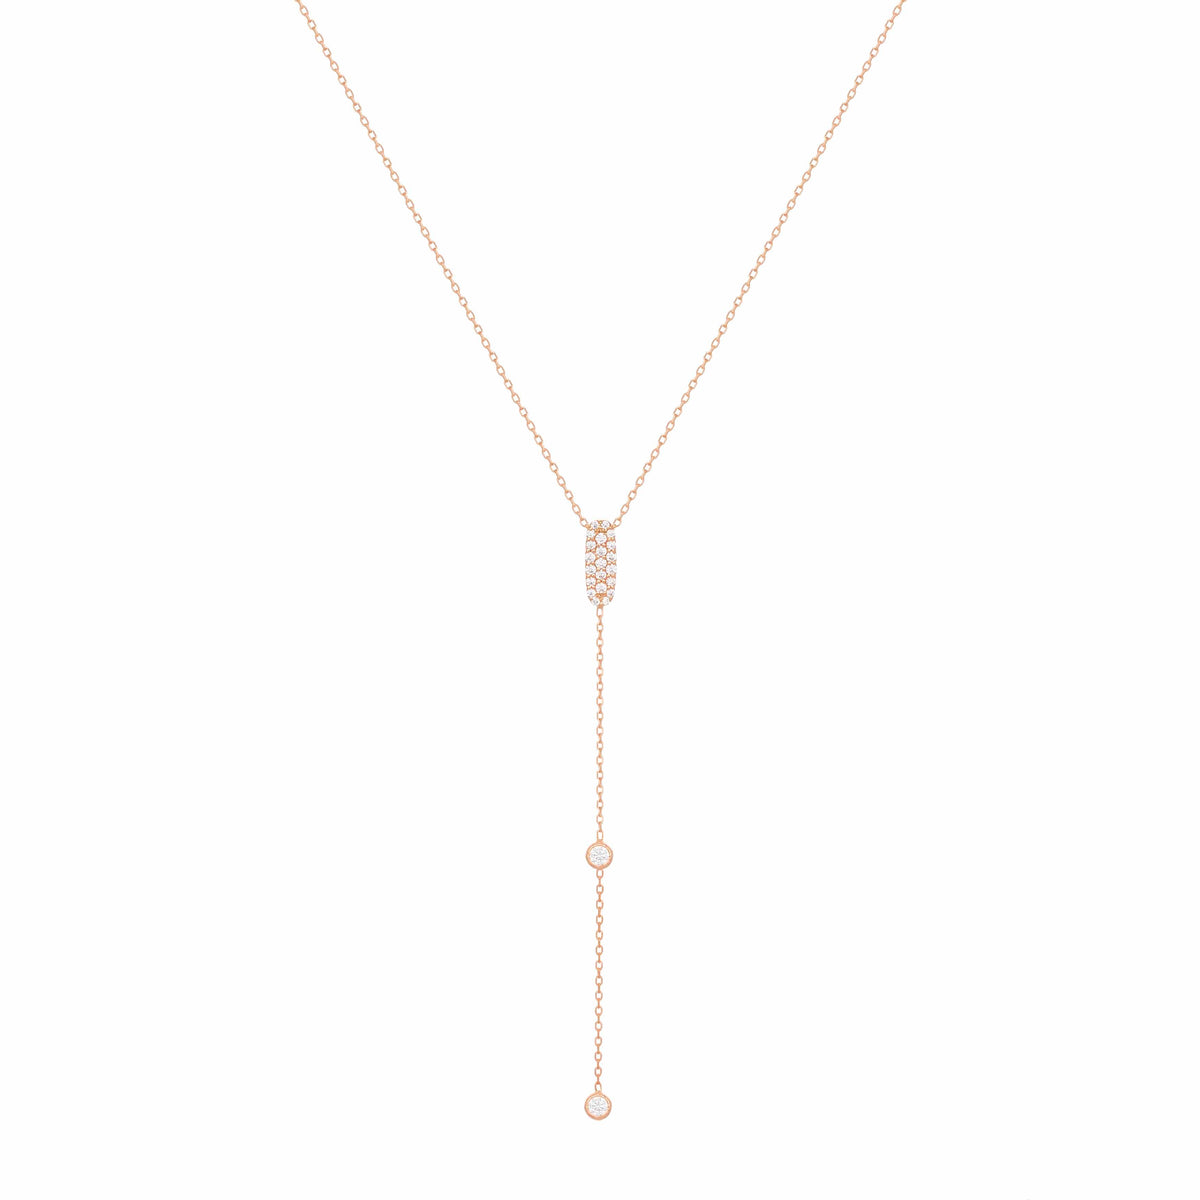 Sparkly Sparkly Lariat Necklace